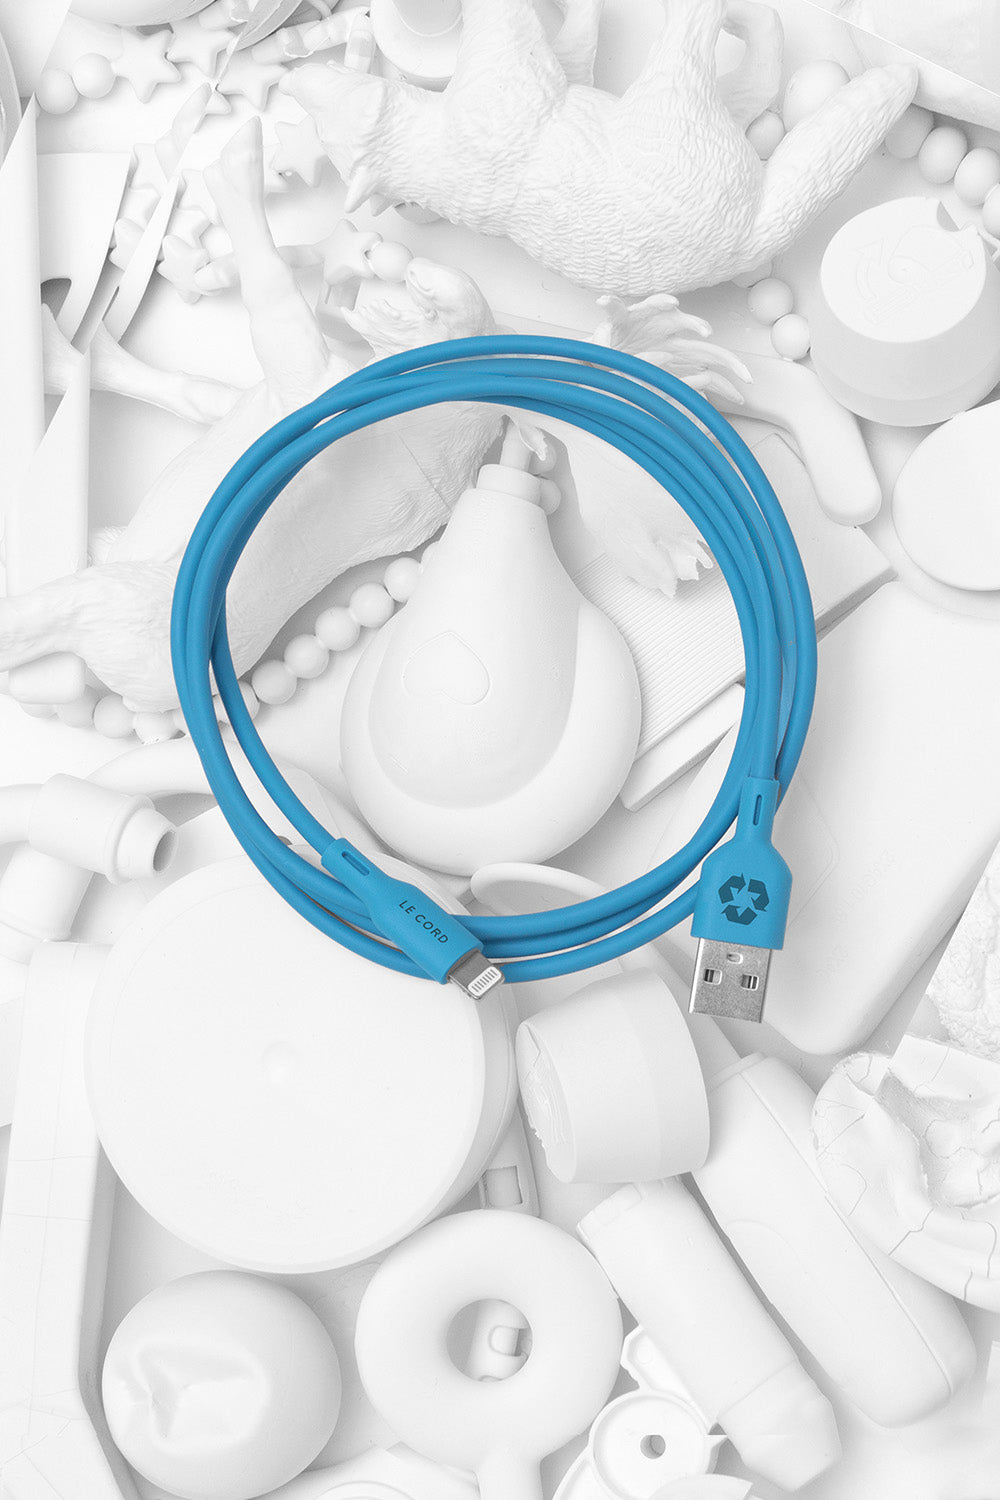 Blue Ocean iPhone Lightning cable · 1.2 meter · Made of recycled plastics-1